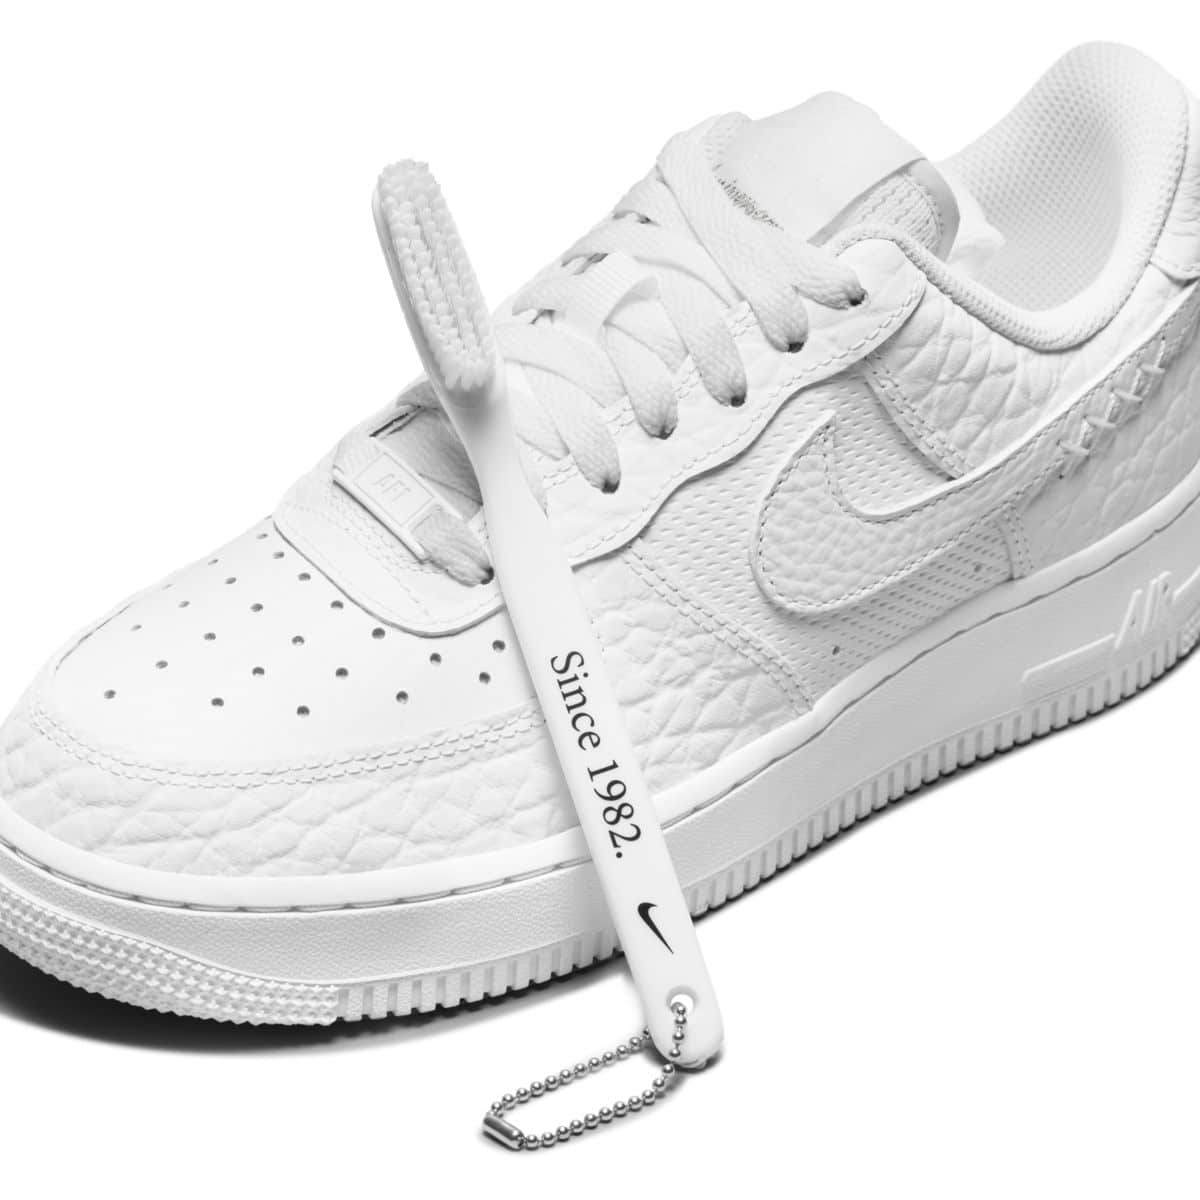 Nike Air Force 1 Low WMNS Color of The Month White Metallic Gold DZ4711-100 10